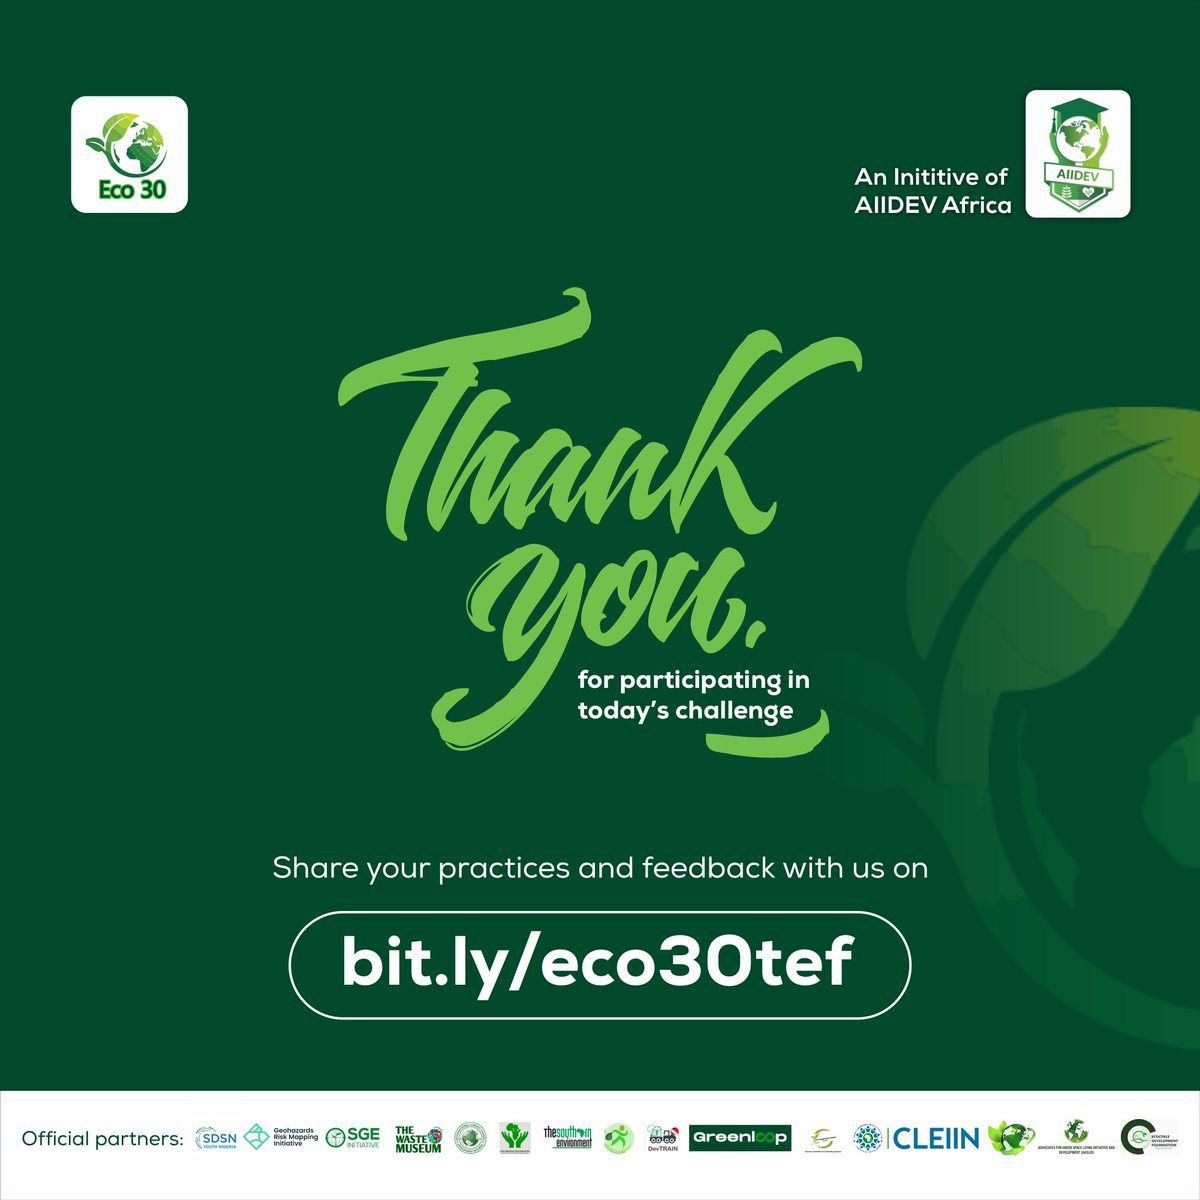 Share your experience on your social media platforms using the hashtag #ECO3Ochampions to inspire/encourage your network to be part of the solution💪🏽

#AIIDEV Africa #ECO30SustainableLivingChallenge2.0 #ECO30impact #ECO30Champions.